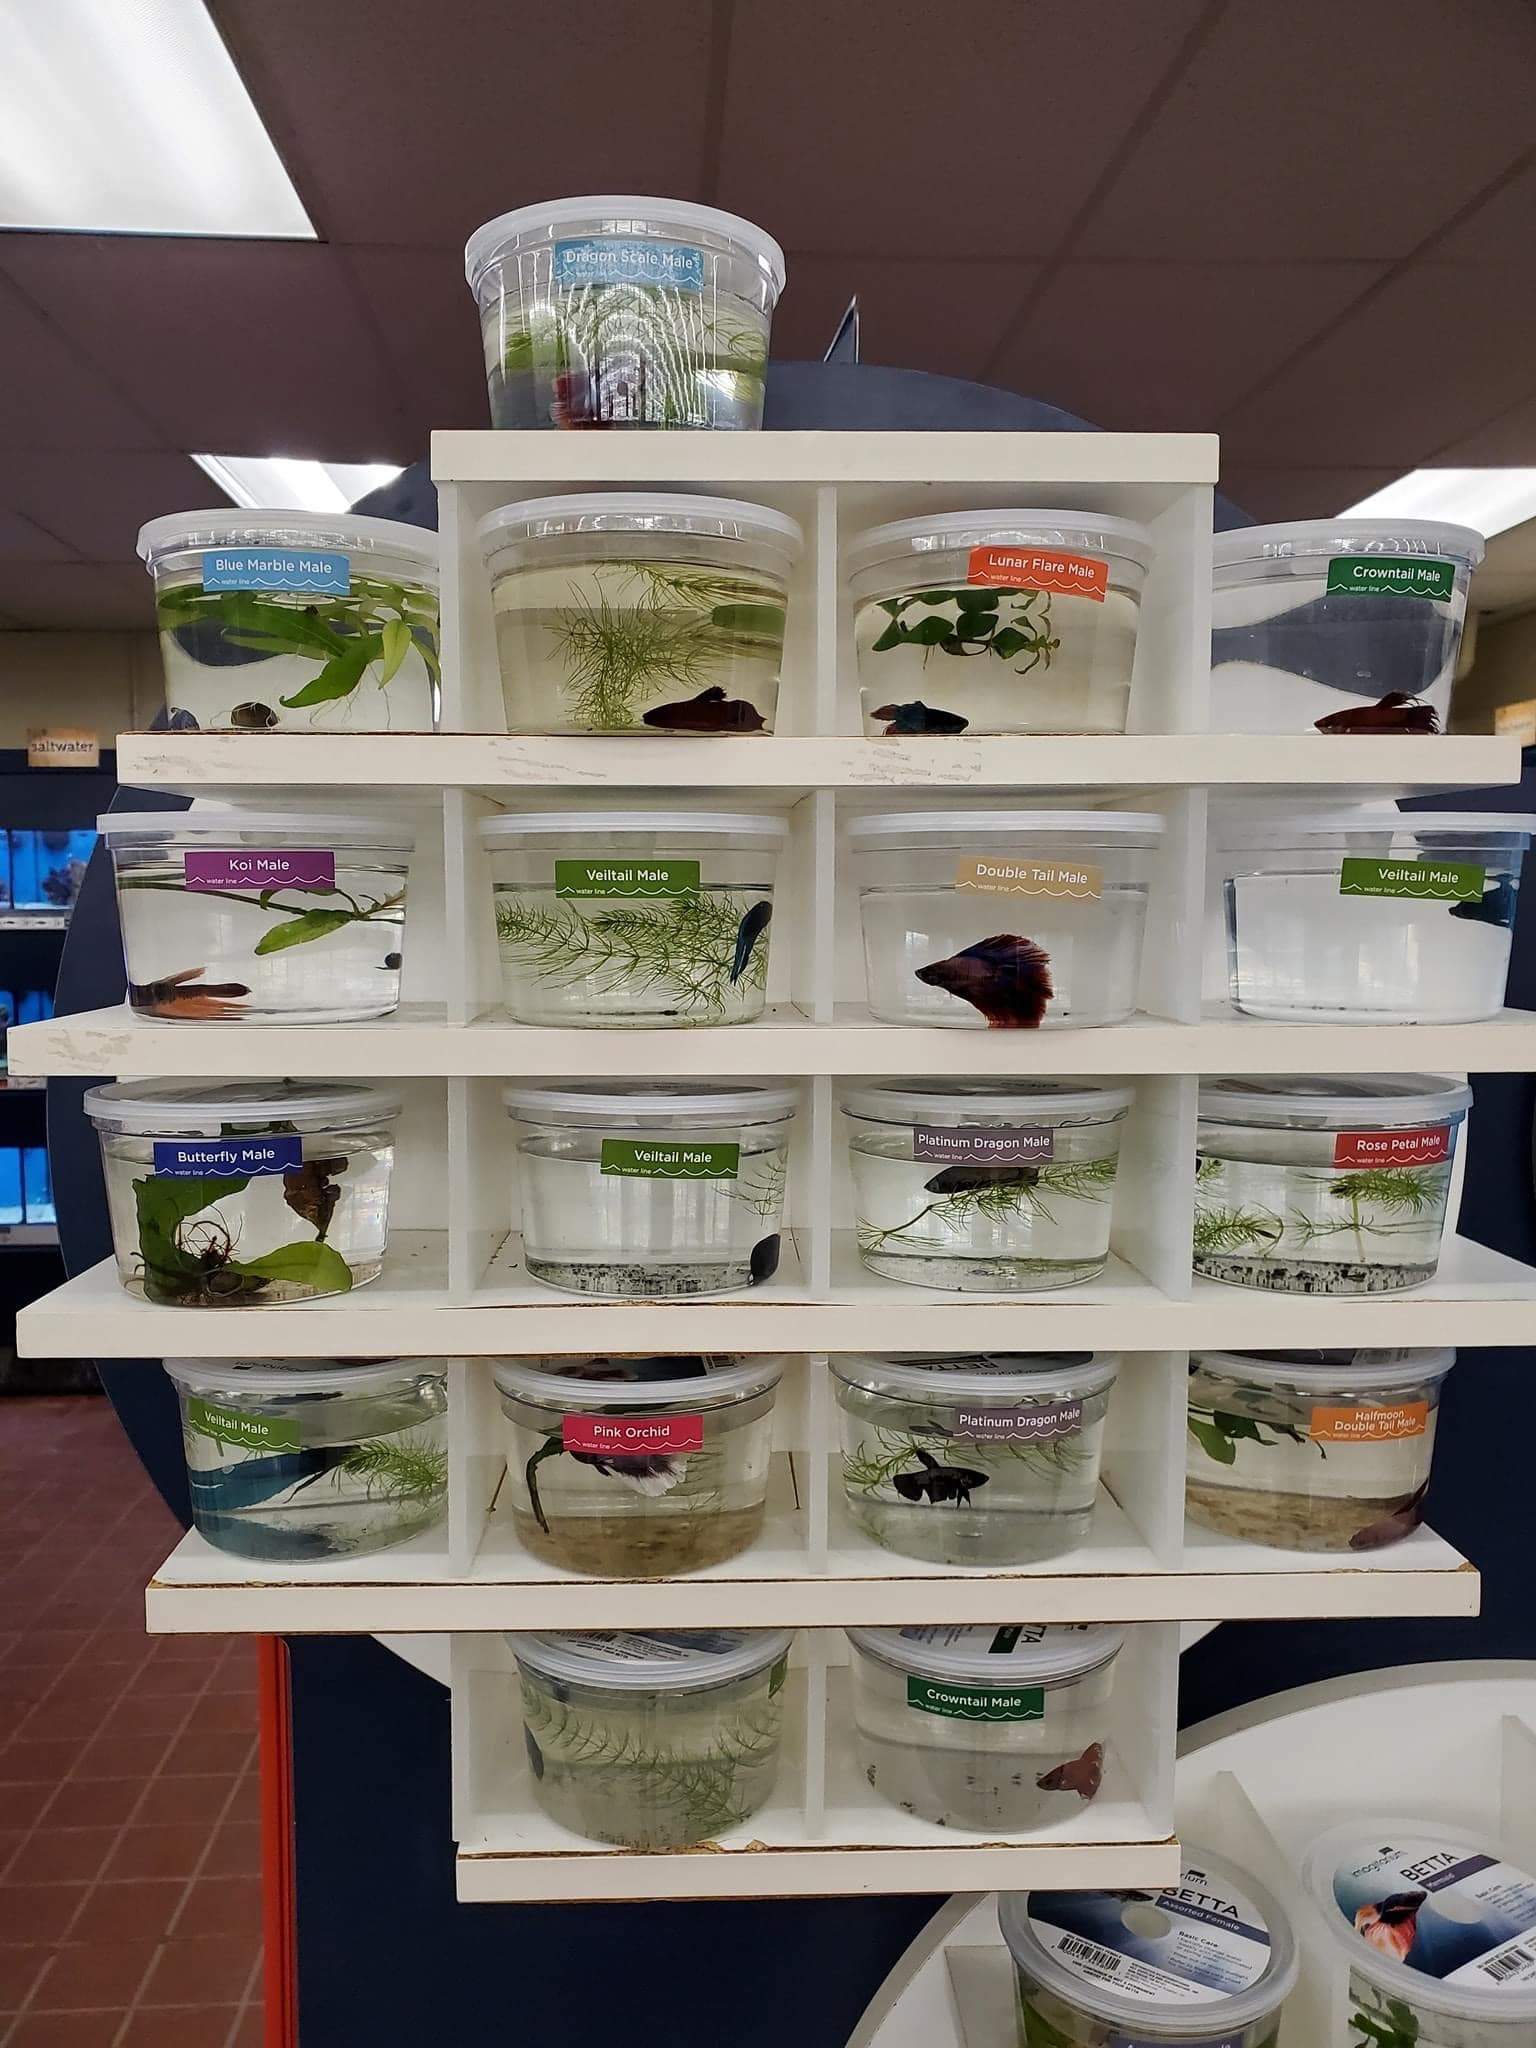 Betta fish in cups on display at Petco store